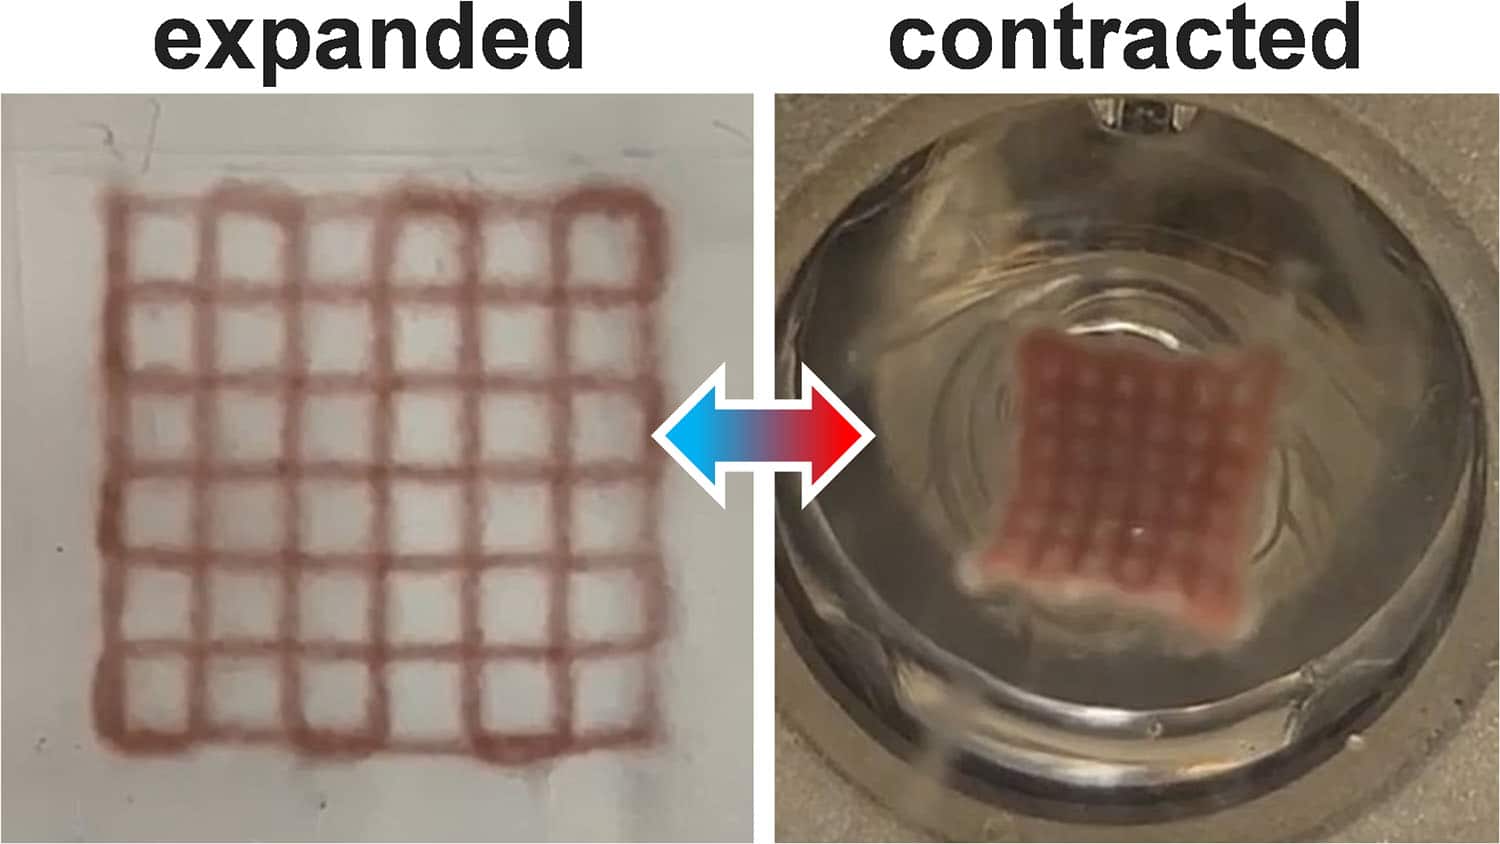 image on left is labeled 'expanded' and shows 3D grid of pink polymer; image on left is labeled 'contracted' and shows a much smaller grid of the pink polymer, with much smaller gaps between the polymer strands